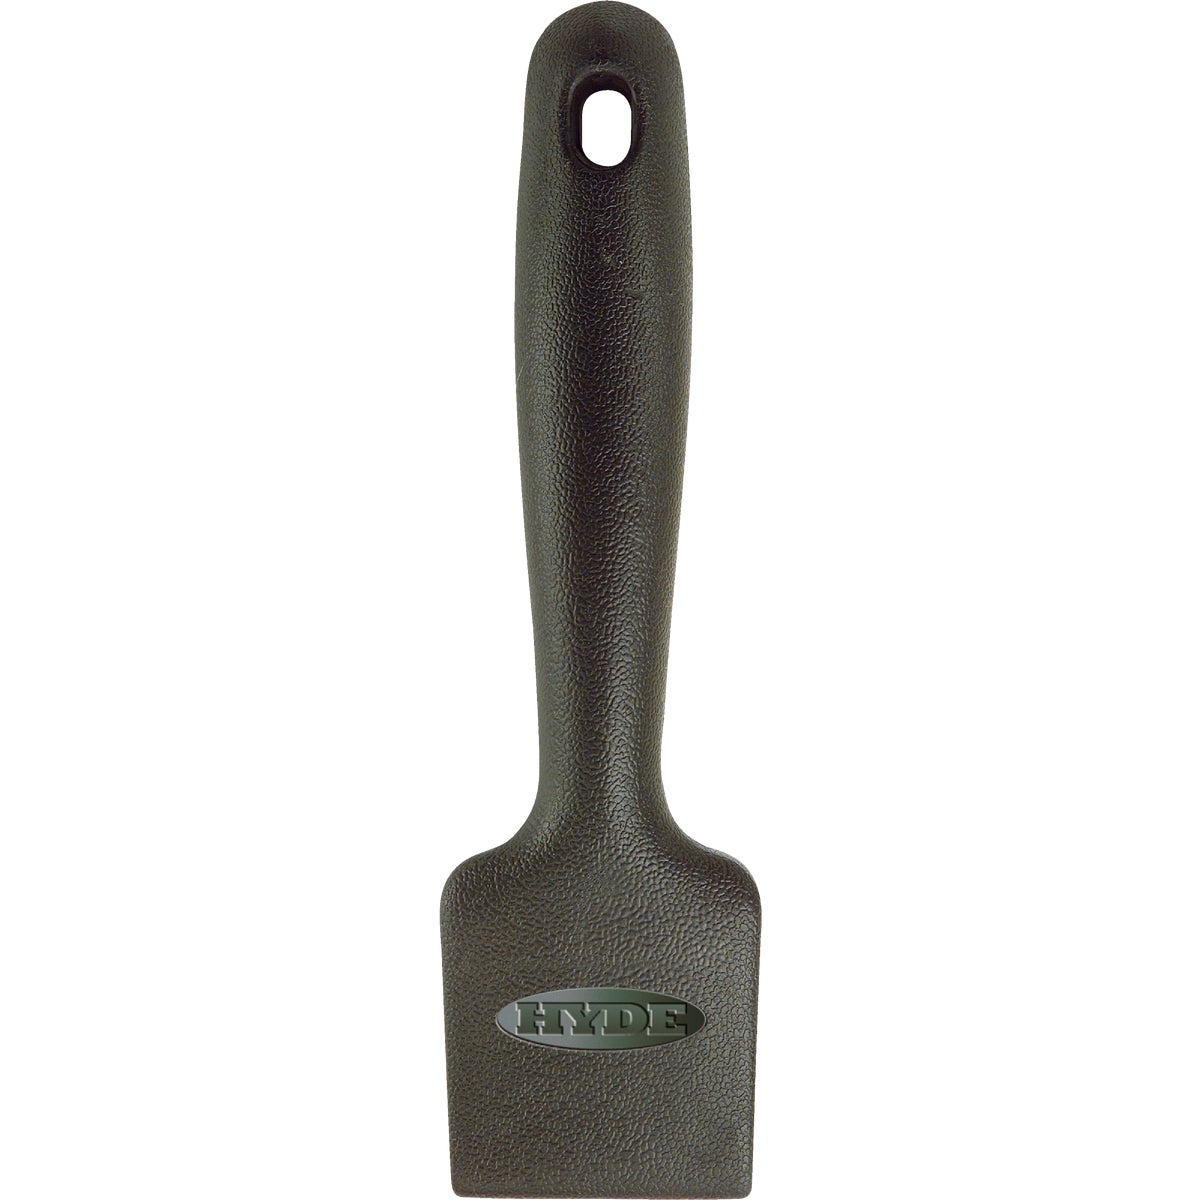 Item 786896, Small profile pull scraper with four scraping edges, ideal for prolonged 